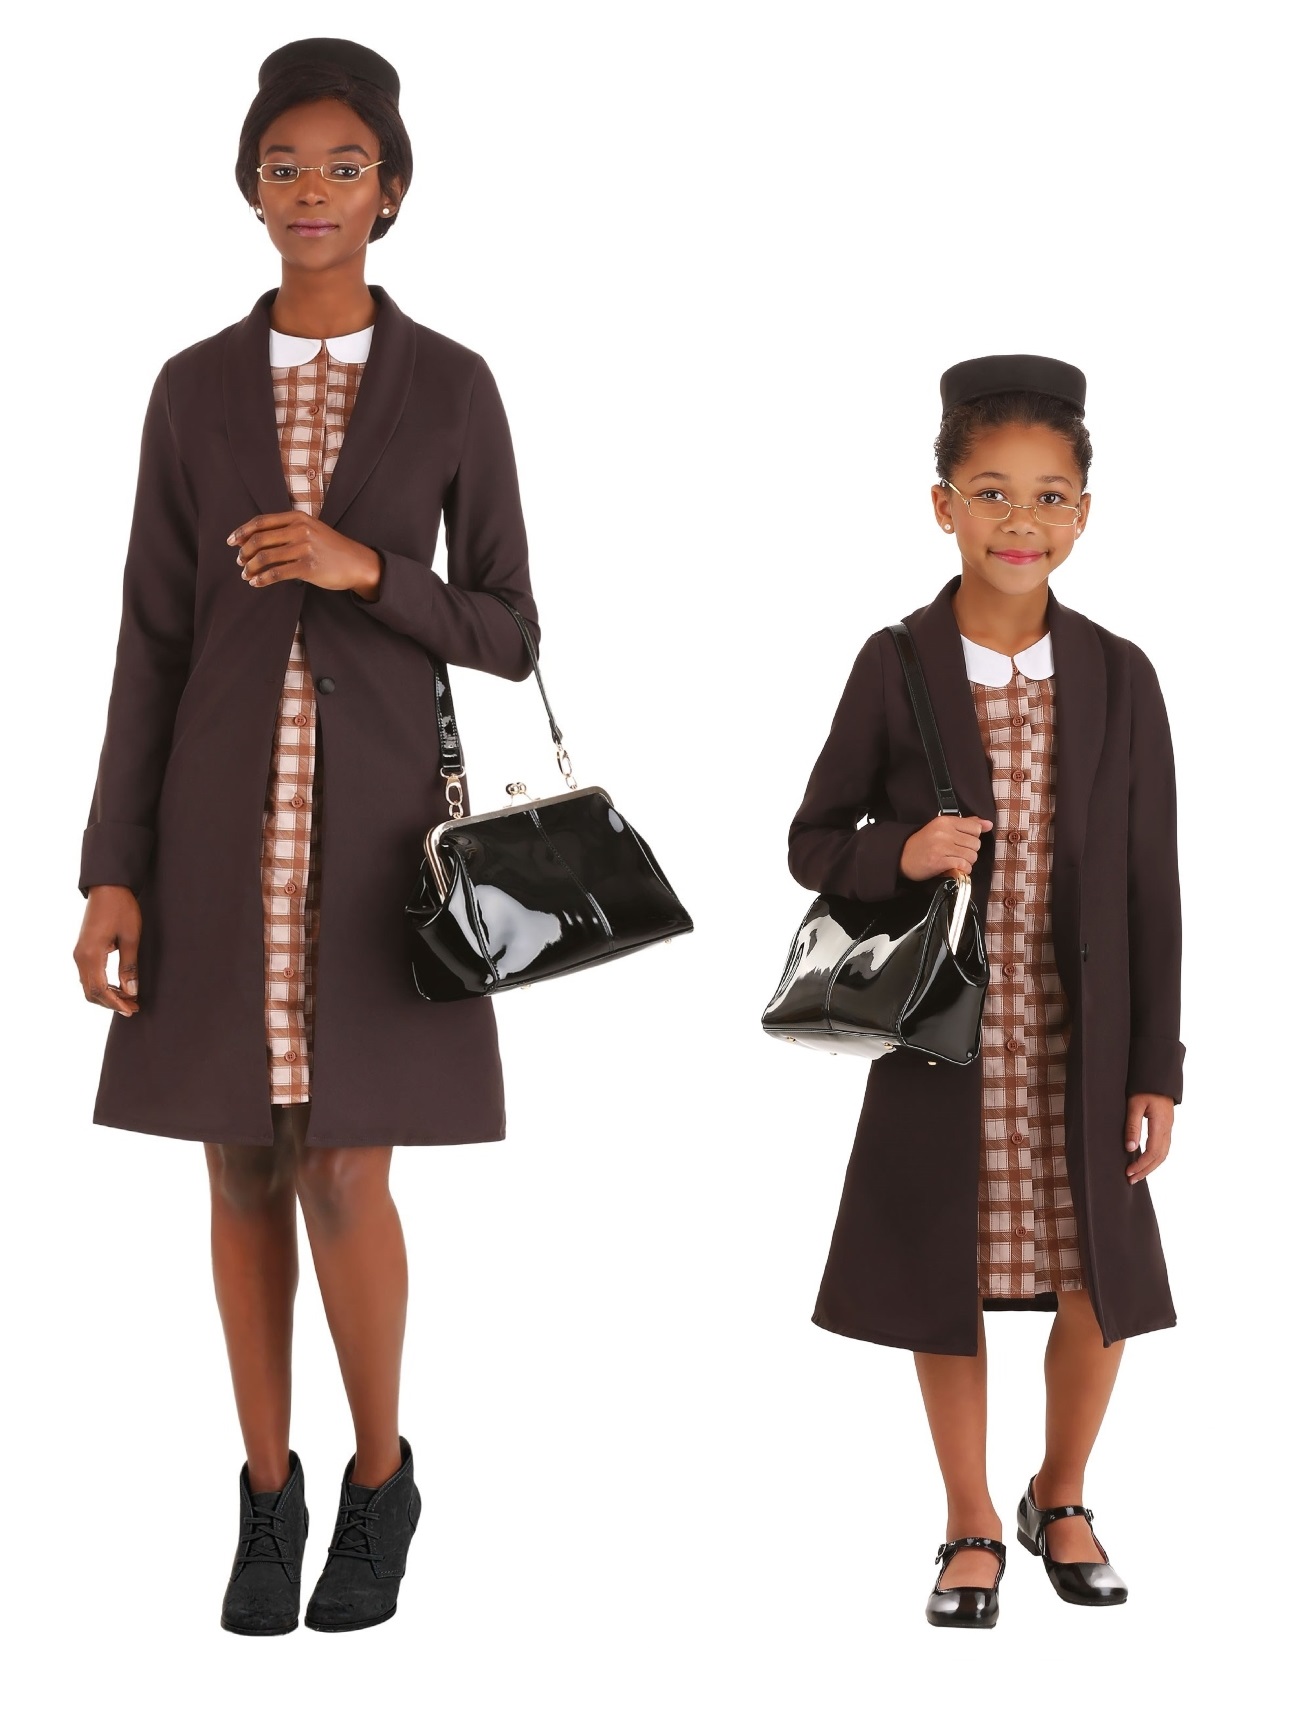 Rosa Parks Costumes